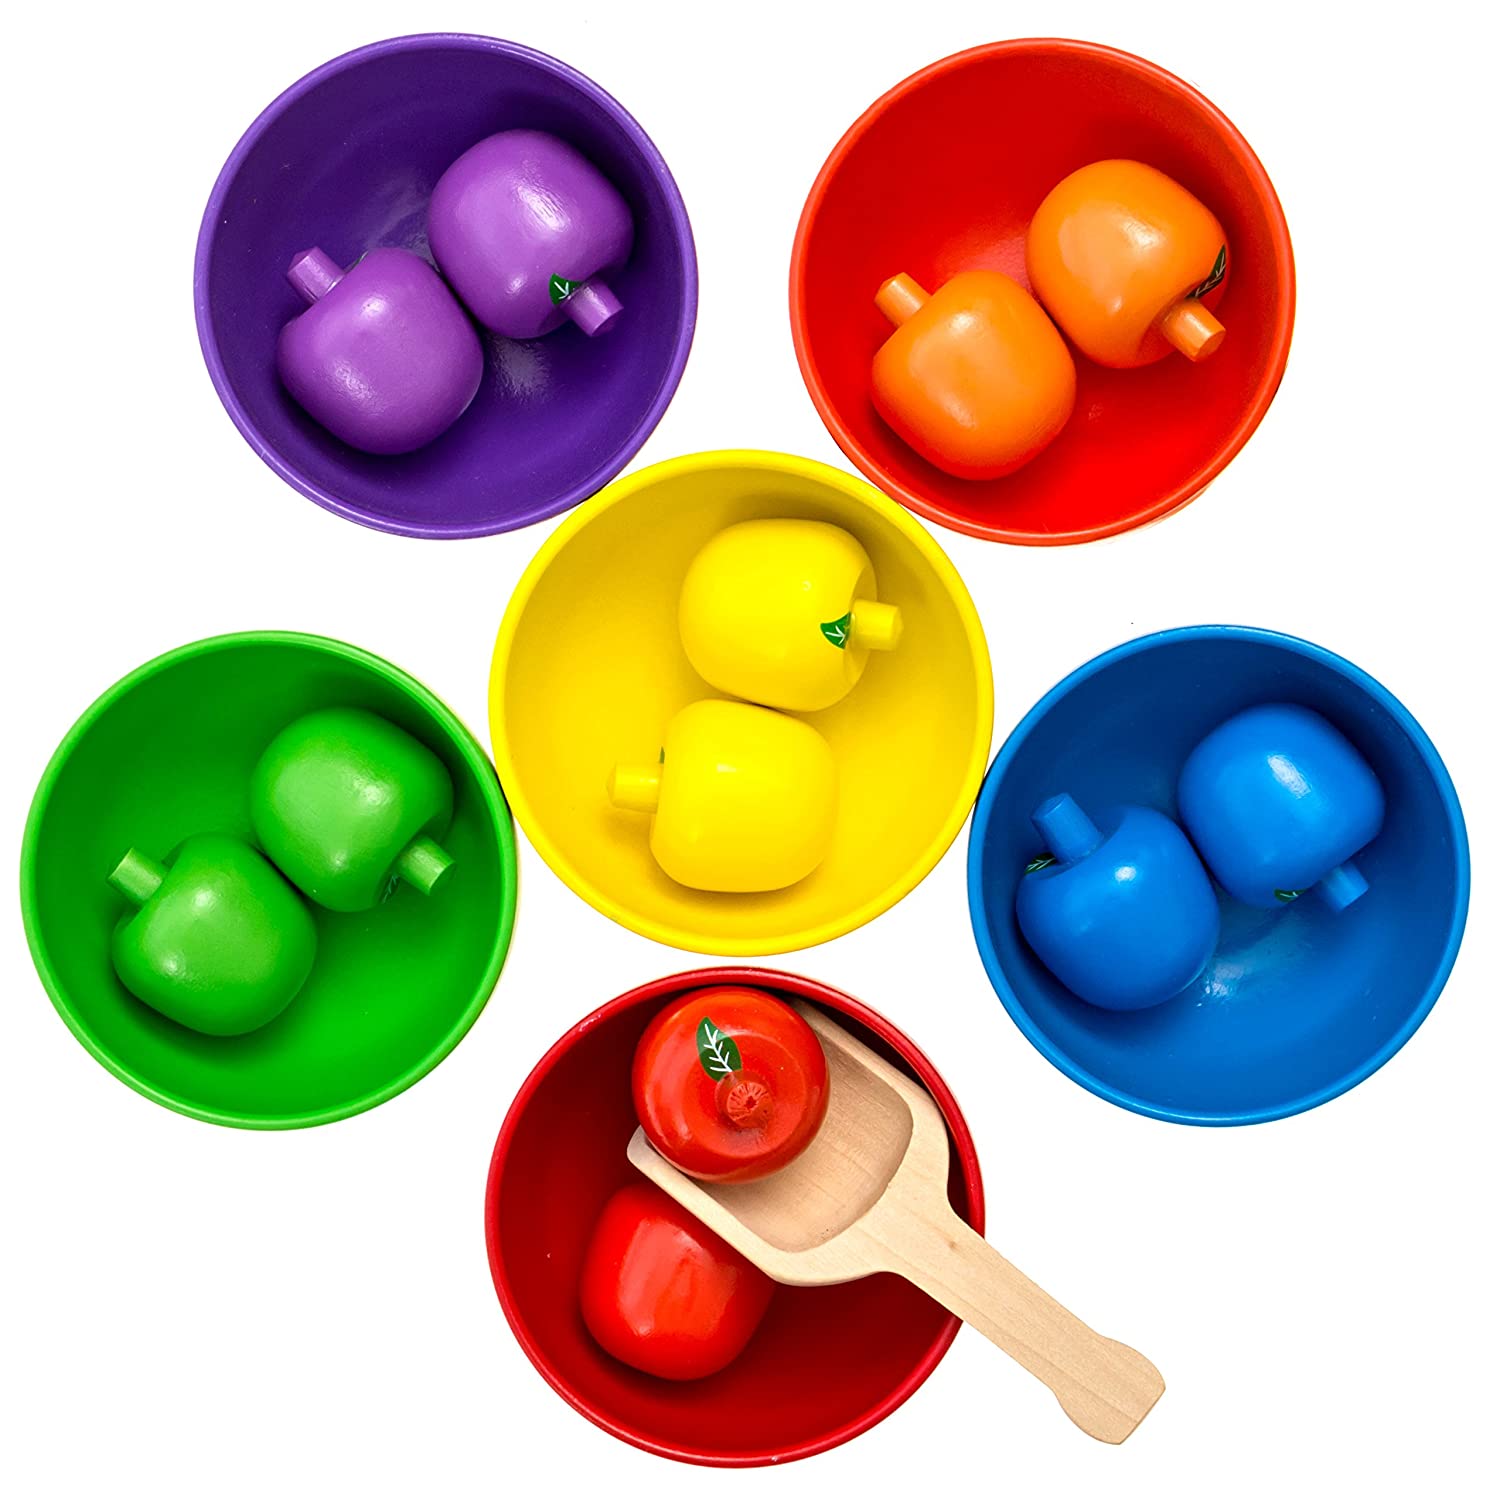 Tulamama Wooden Educational Toys for 3 Year Olds - Perfect for Learning Colors, Counting & Sorting Toys